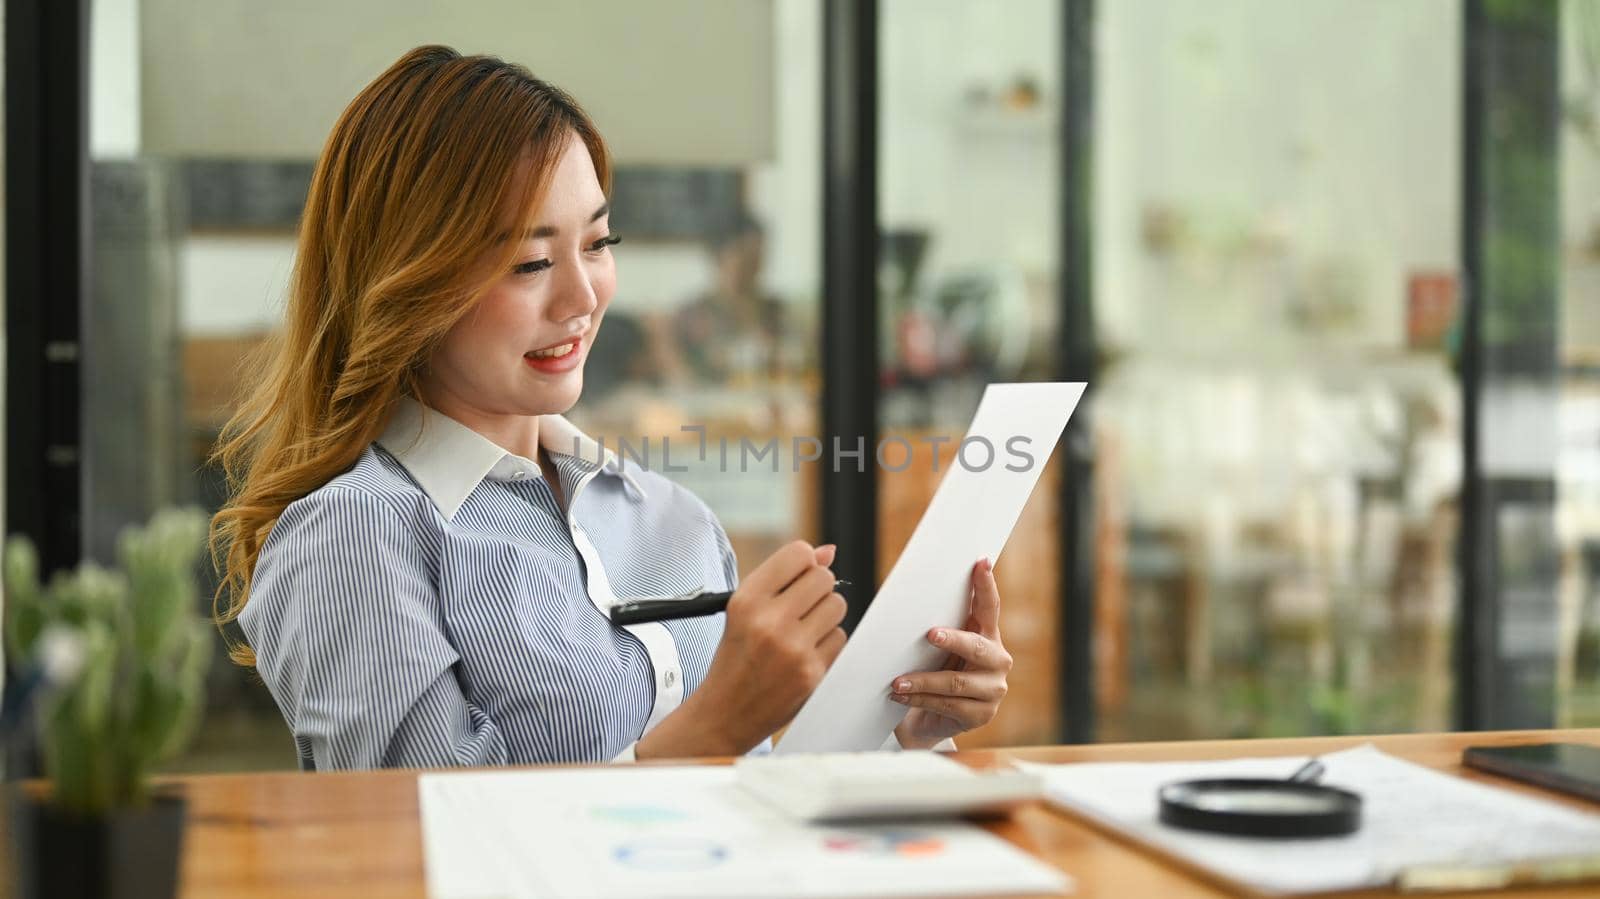 Professional female accountant examining the numerical data on financial document at her workplace.